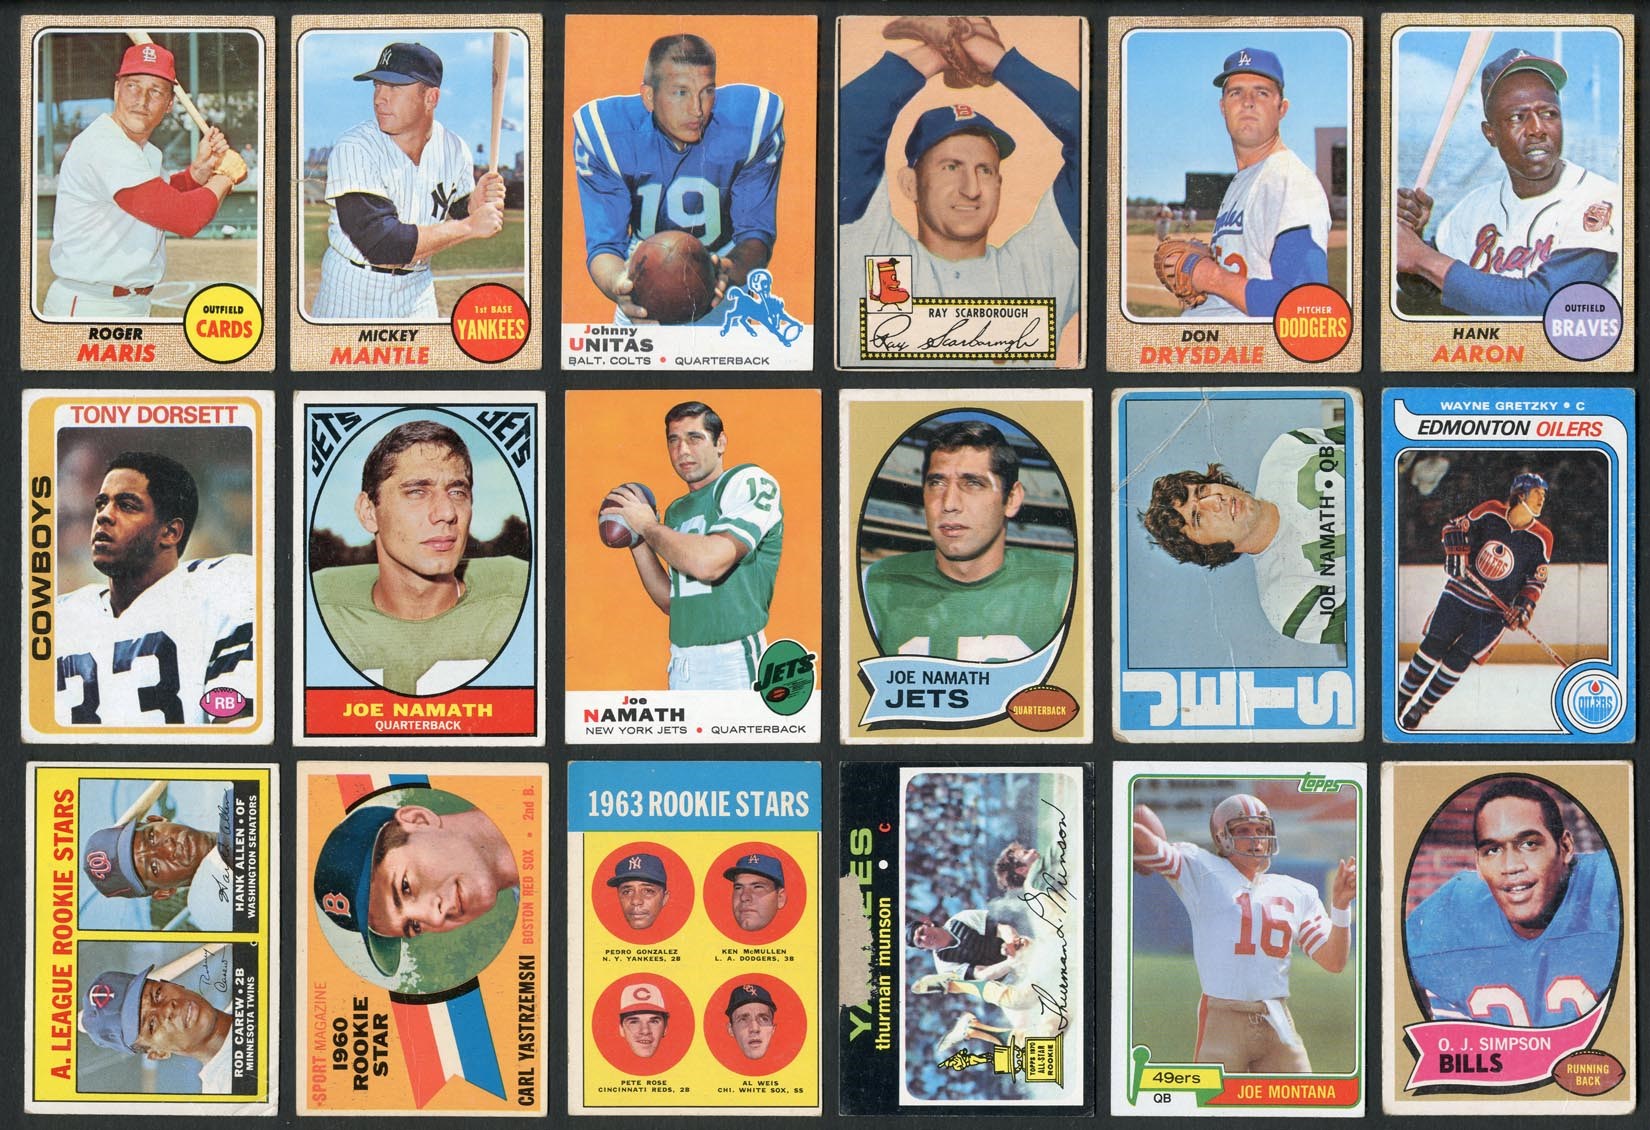 Baseball and Trading Cards - 1950s-1970s Multi-Sport HOFer & Star Collection with Major Names (600+)